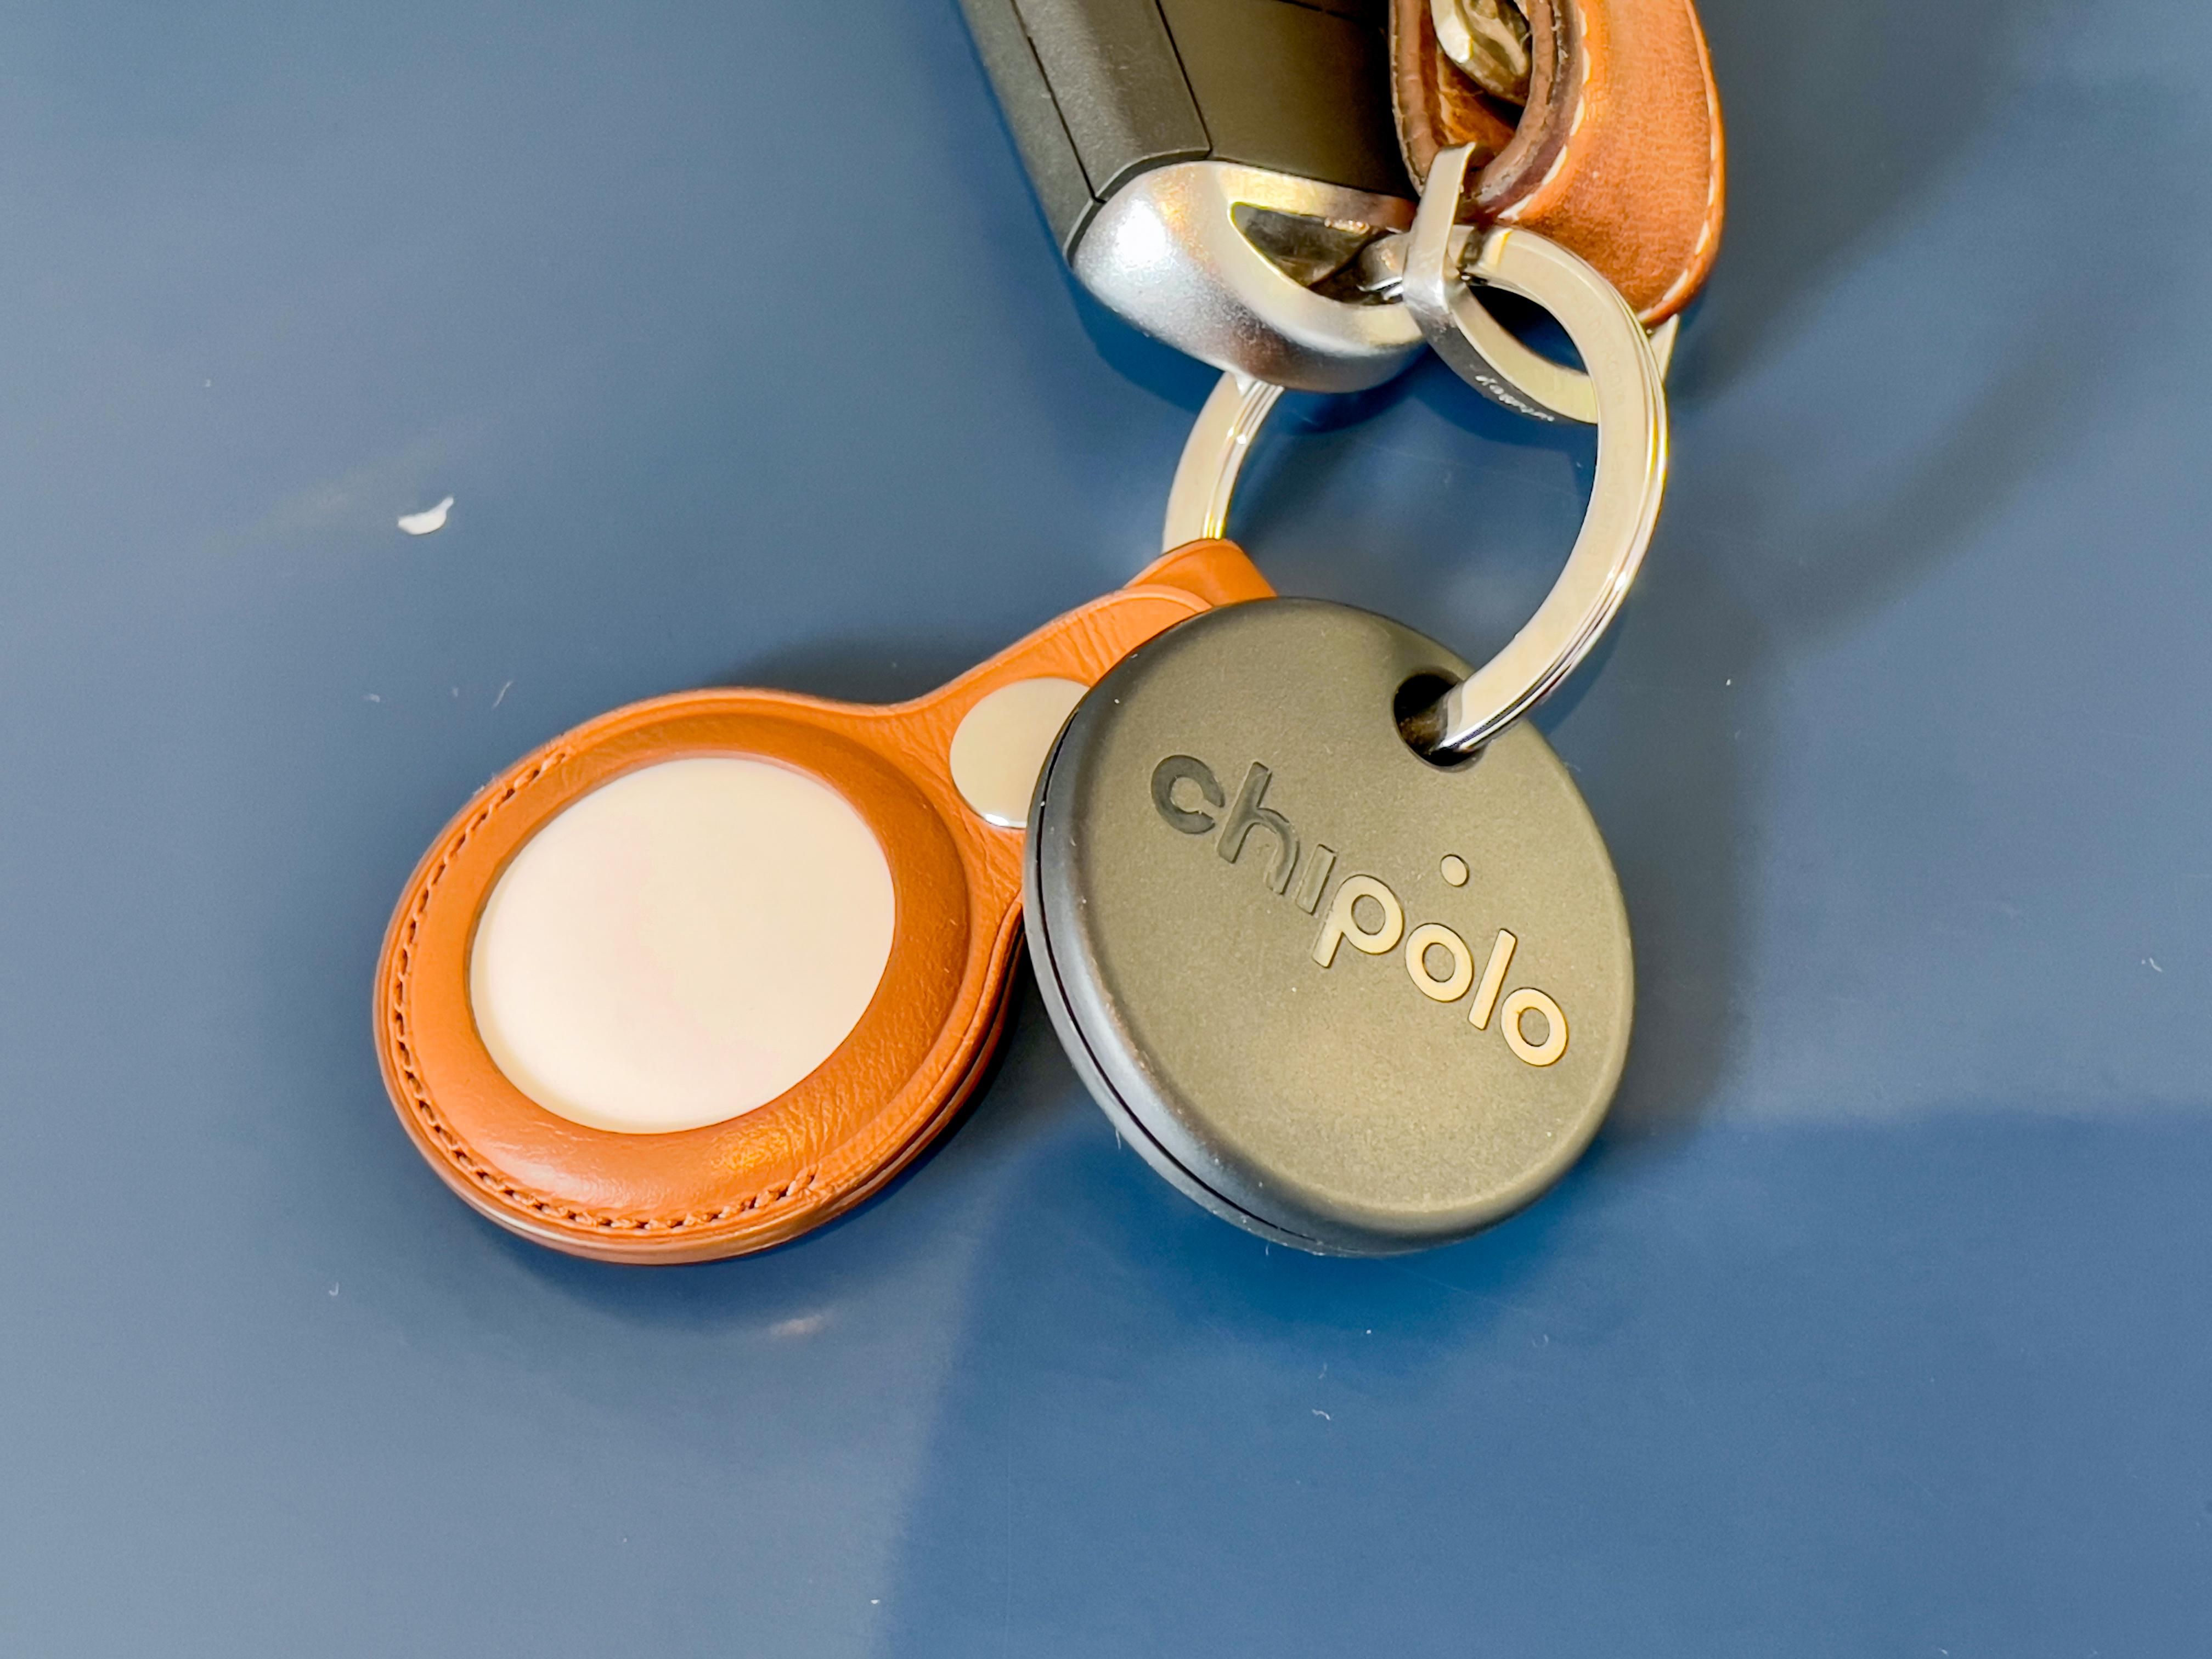 Looking for an AirTag alternative? - Chipolo